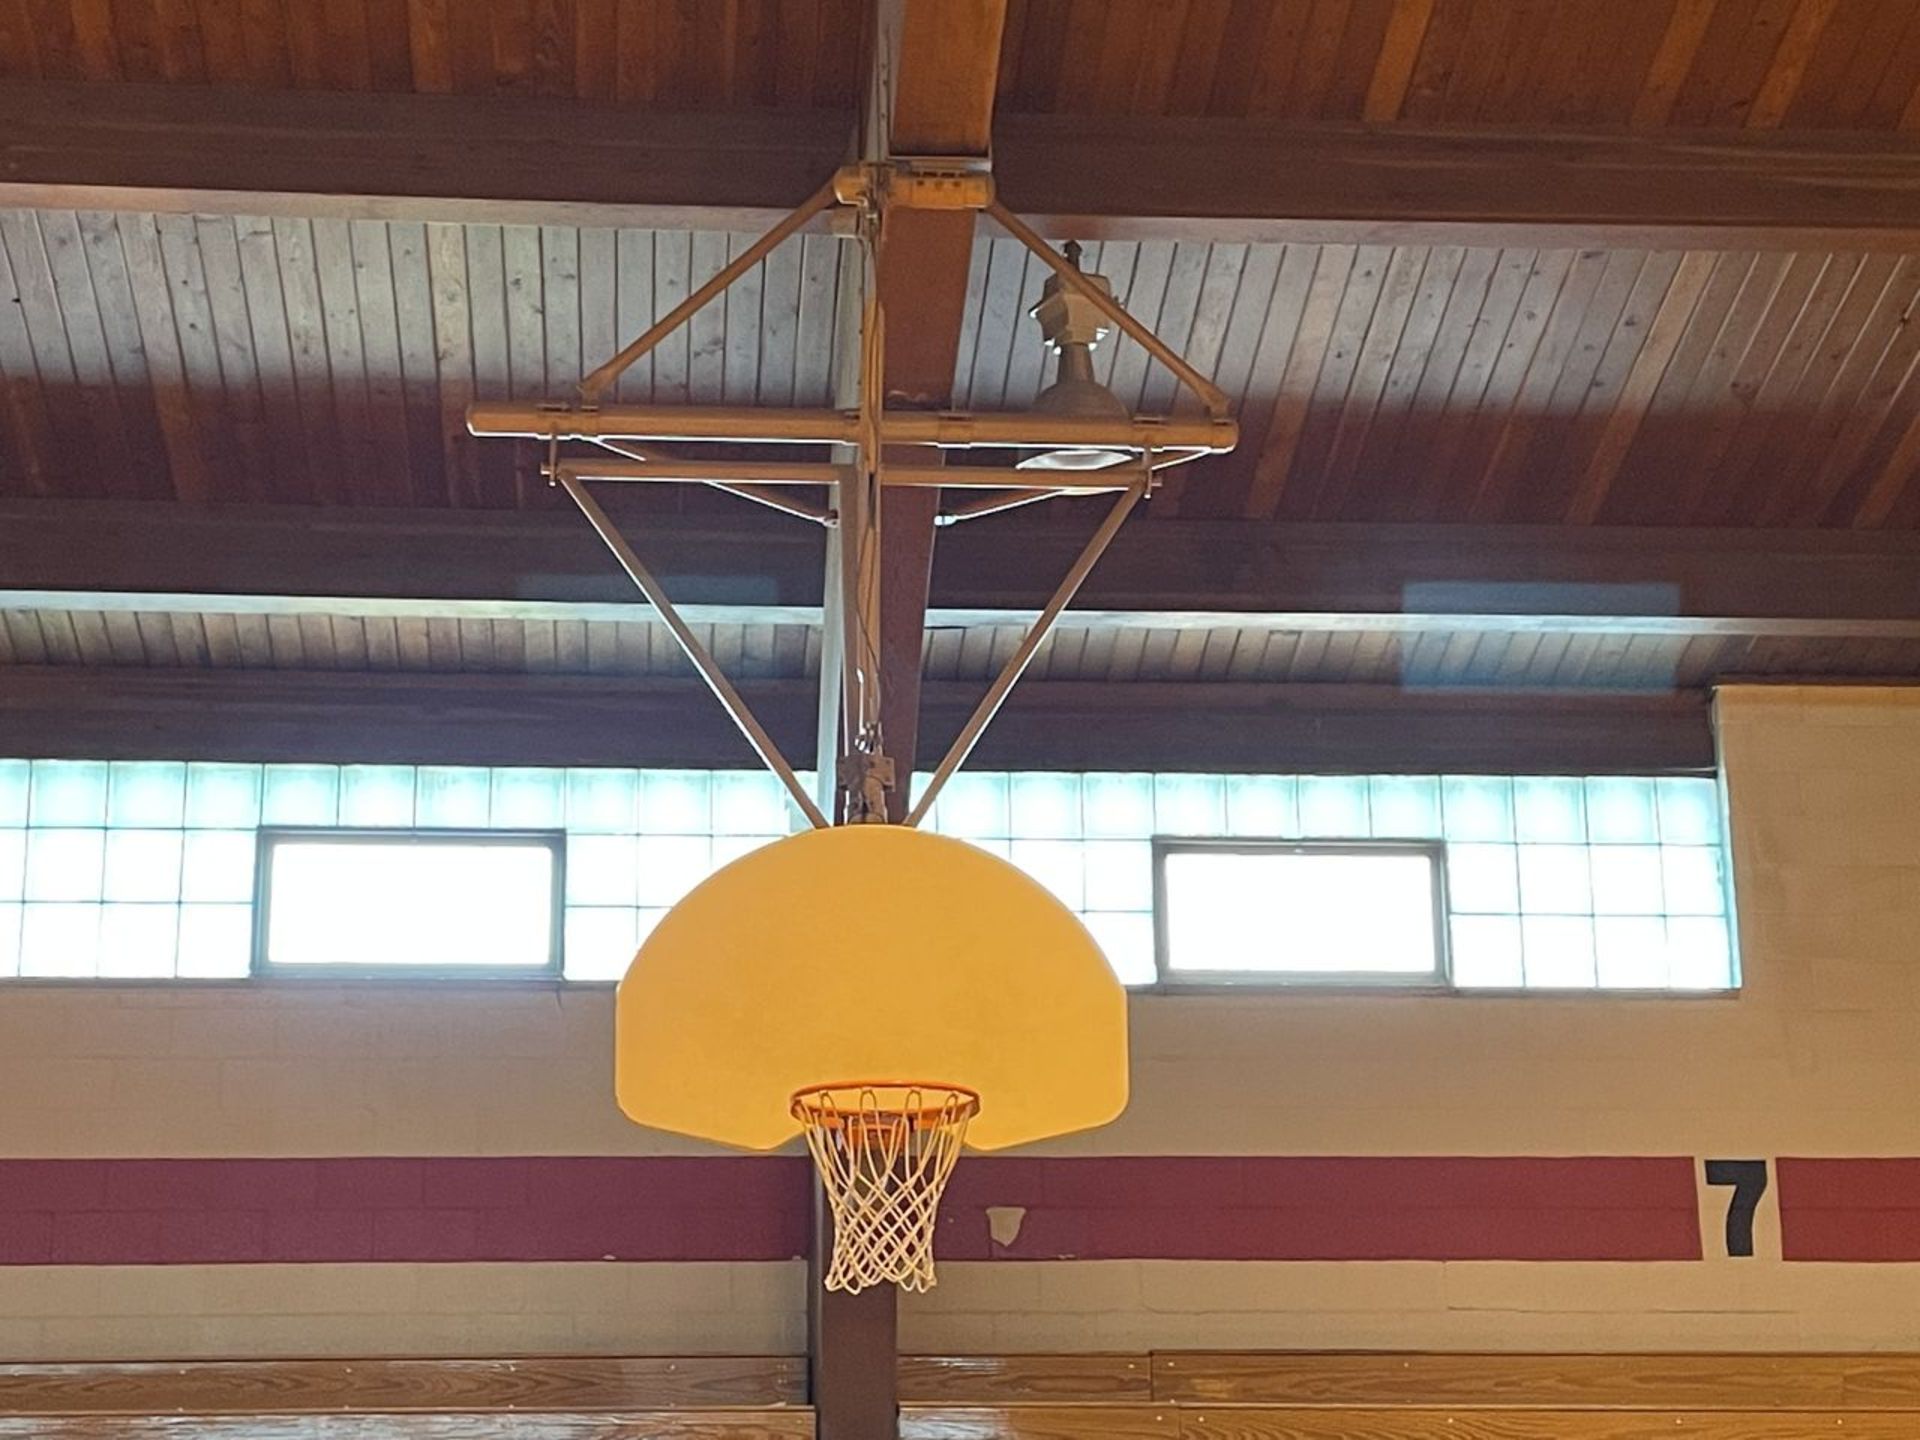 Lot - (2) Wood Backboards with Rim and Net, Ceiling Mounted (Gym) - Image 2 of 2